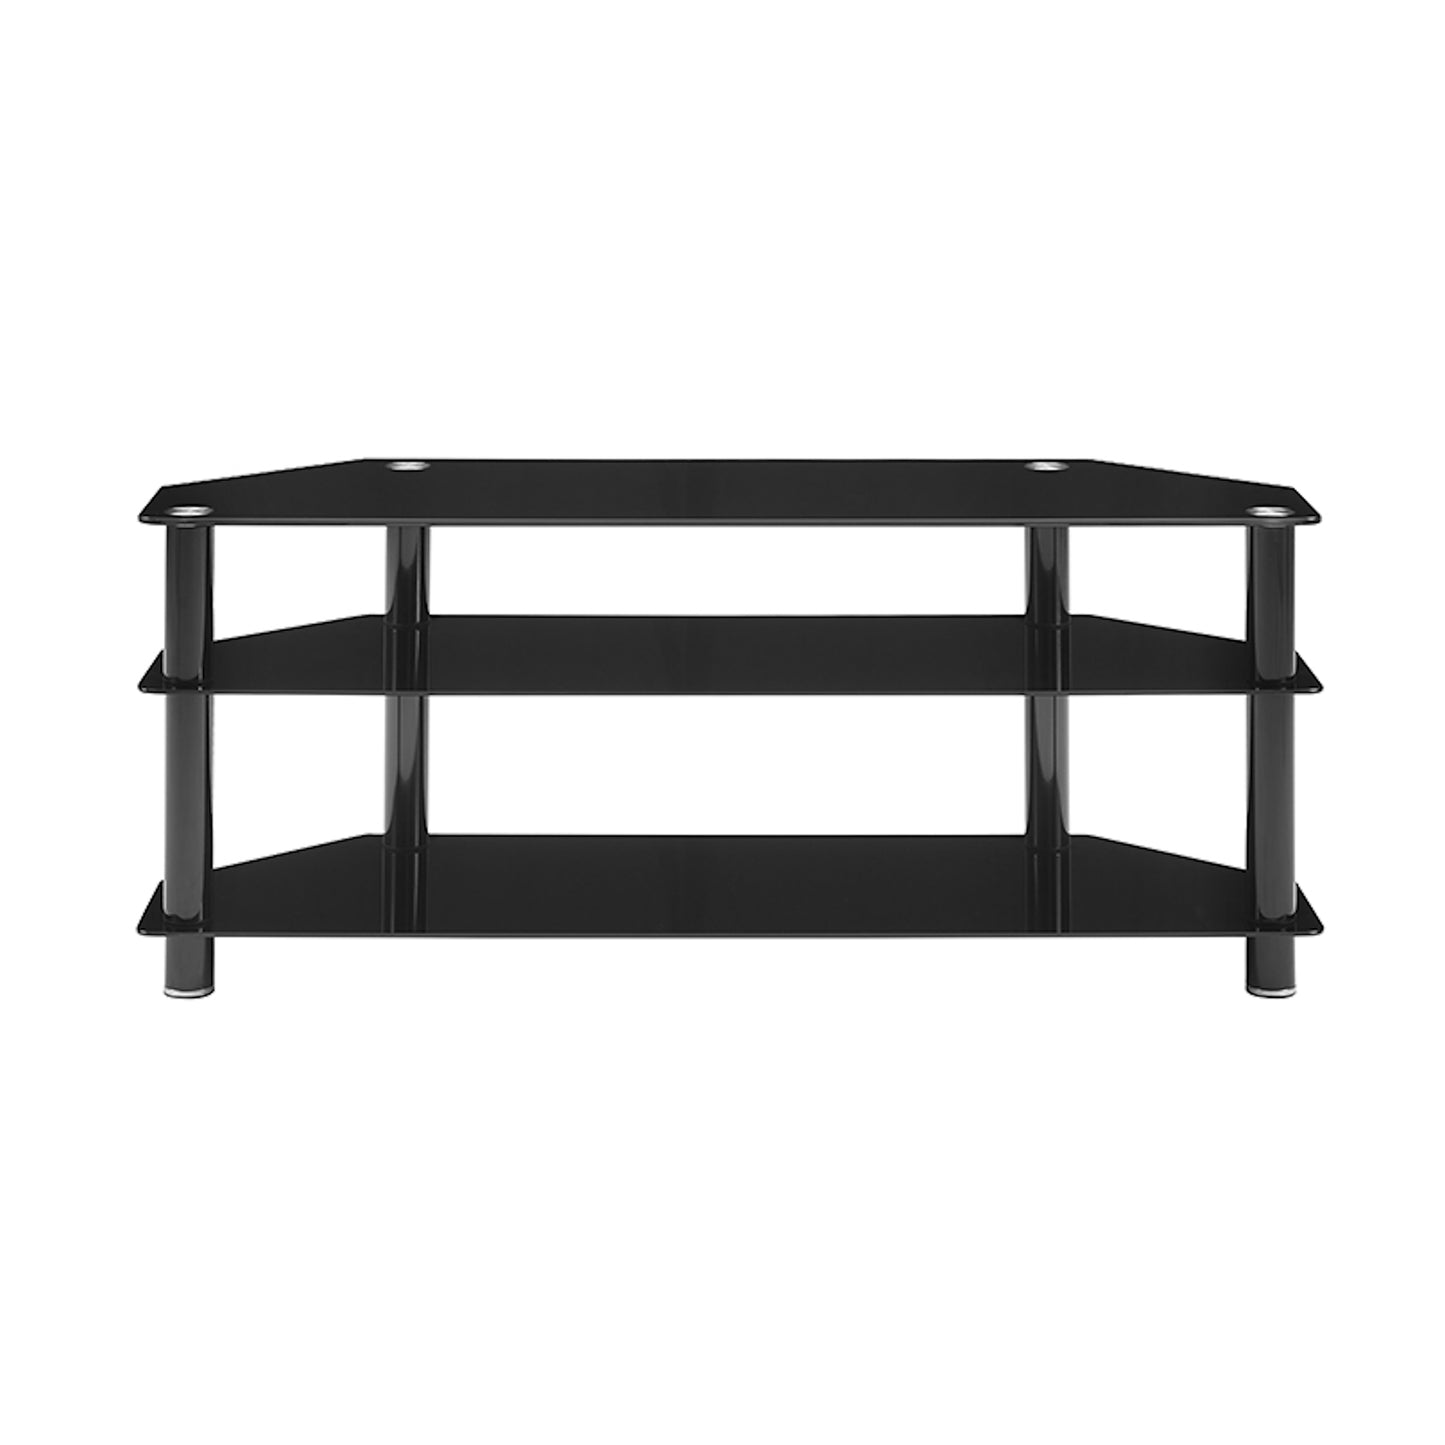 Tauris ACE Entertainment Center, TV Stand, Entertainment Unit 1200mm Tempered Glass and Steel Unit Black